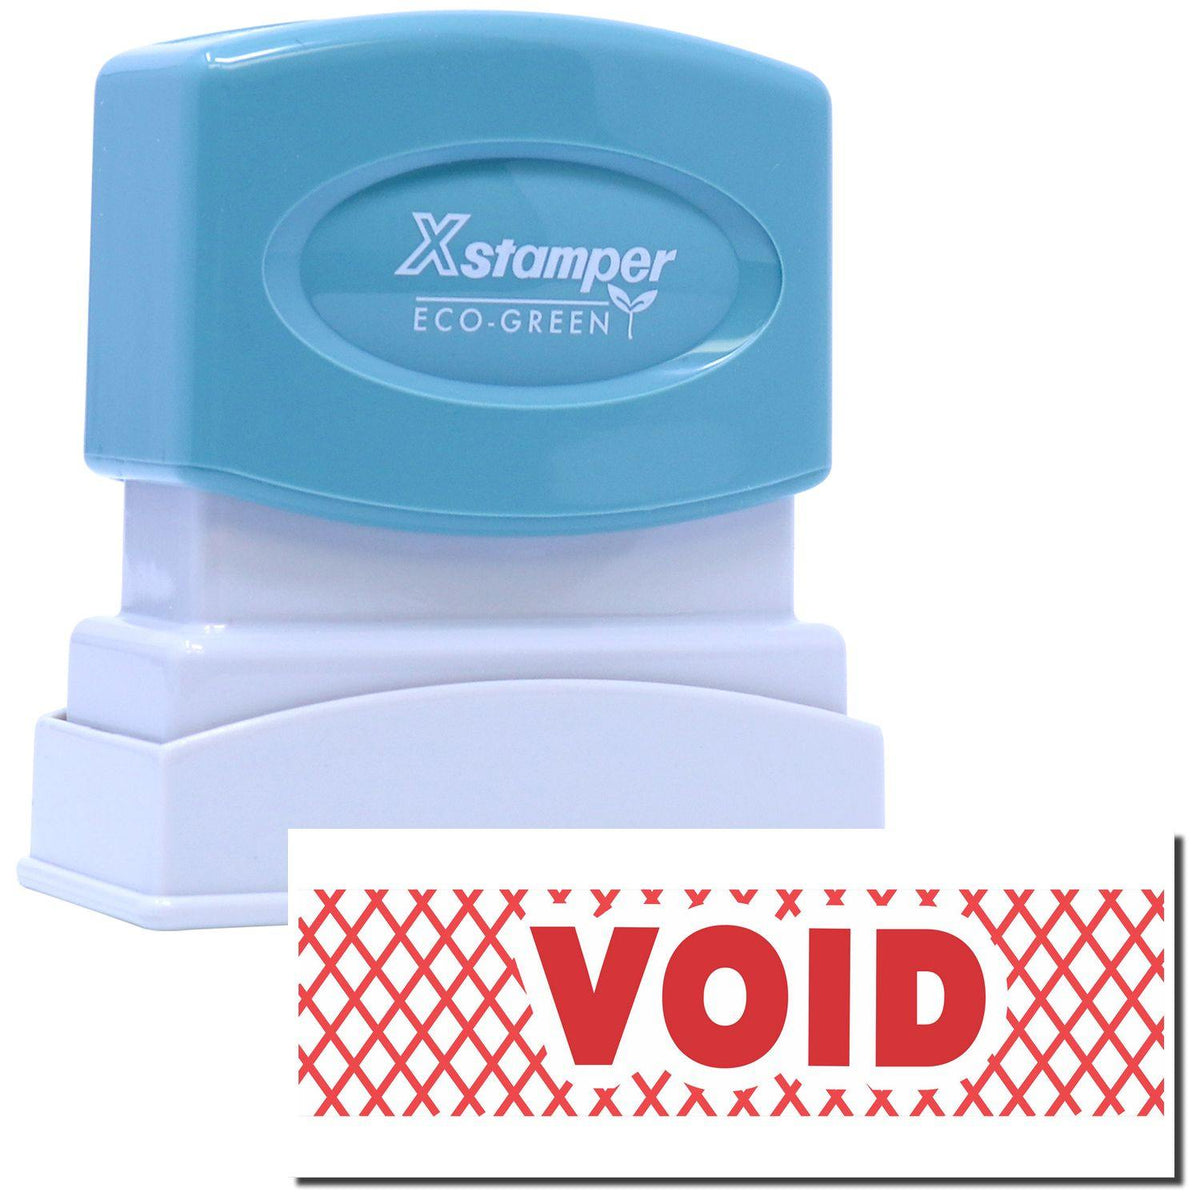 An xstamper stamp with a stamped image showing how the text &quot;VOID&quot; in a red font with cross (x) signs all around it is displayed after stamping.